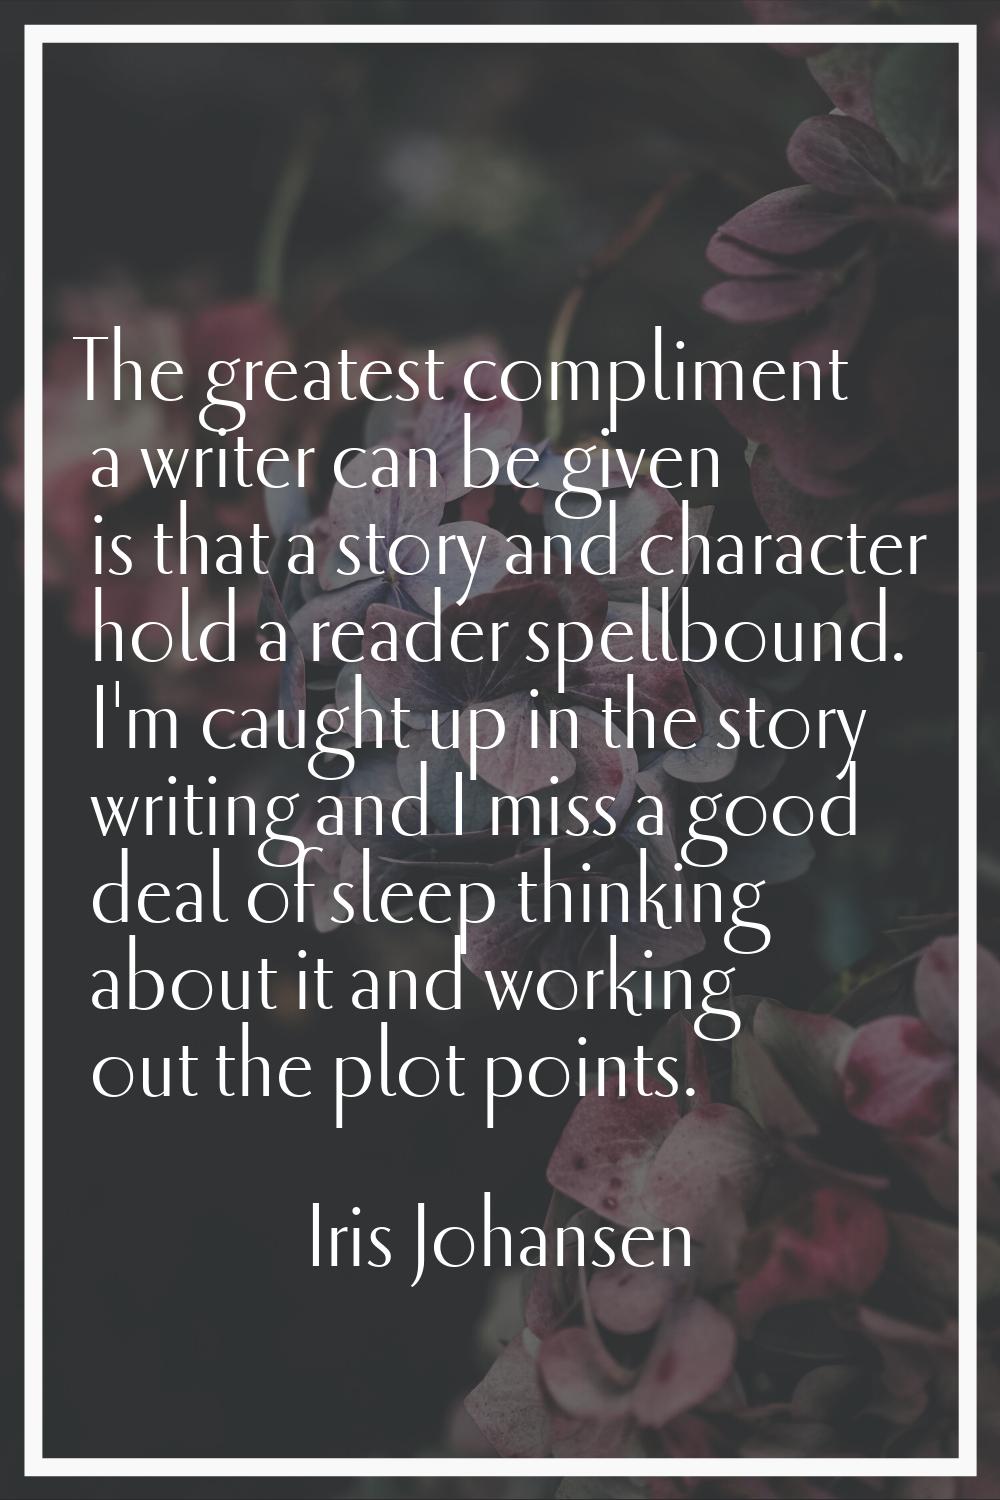 The greatest compliment a writer can be given is that a story and character hold a reader spellboun